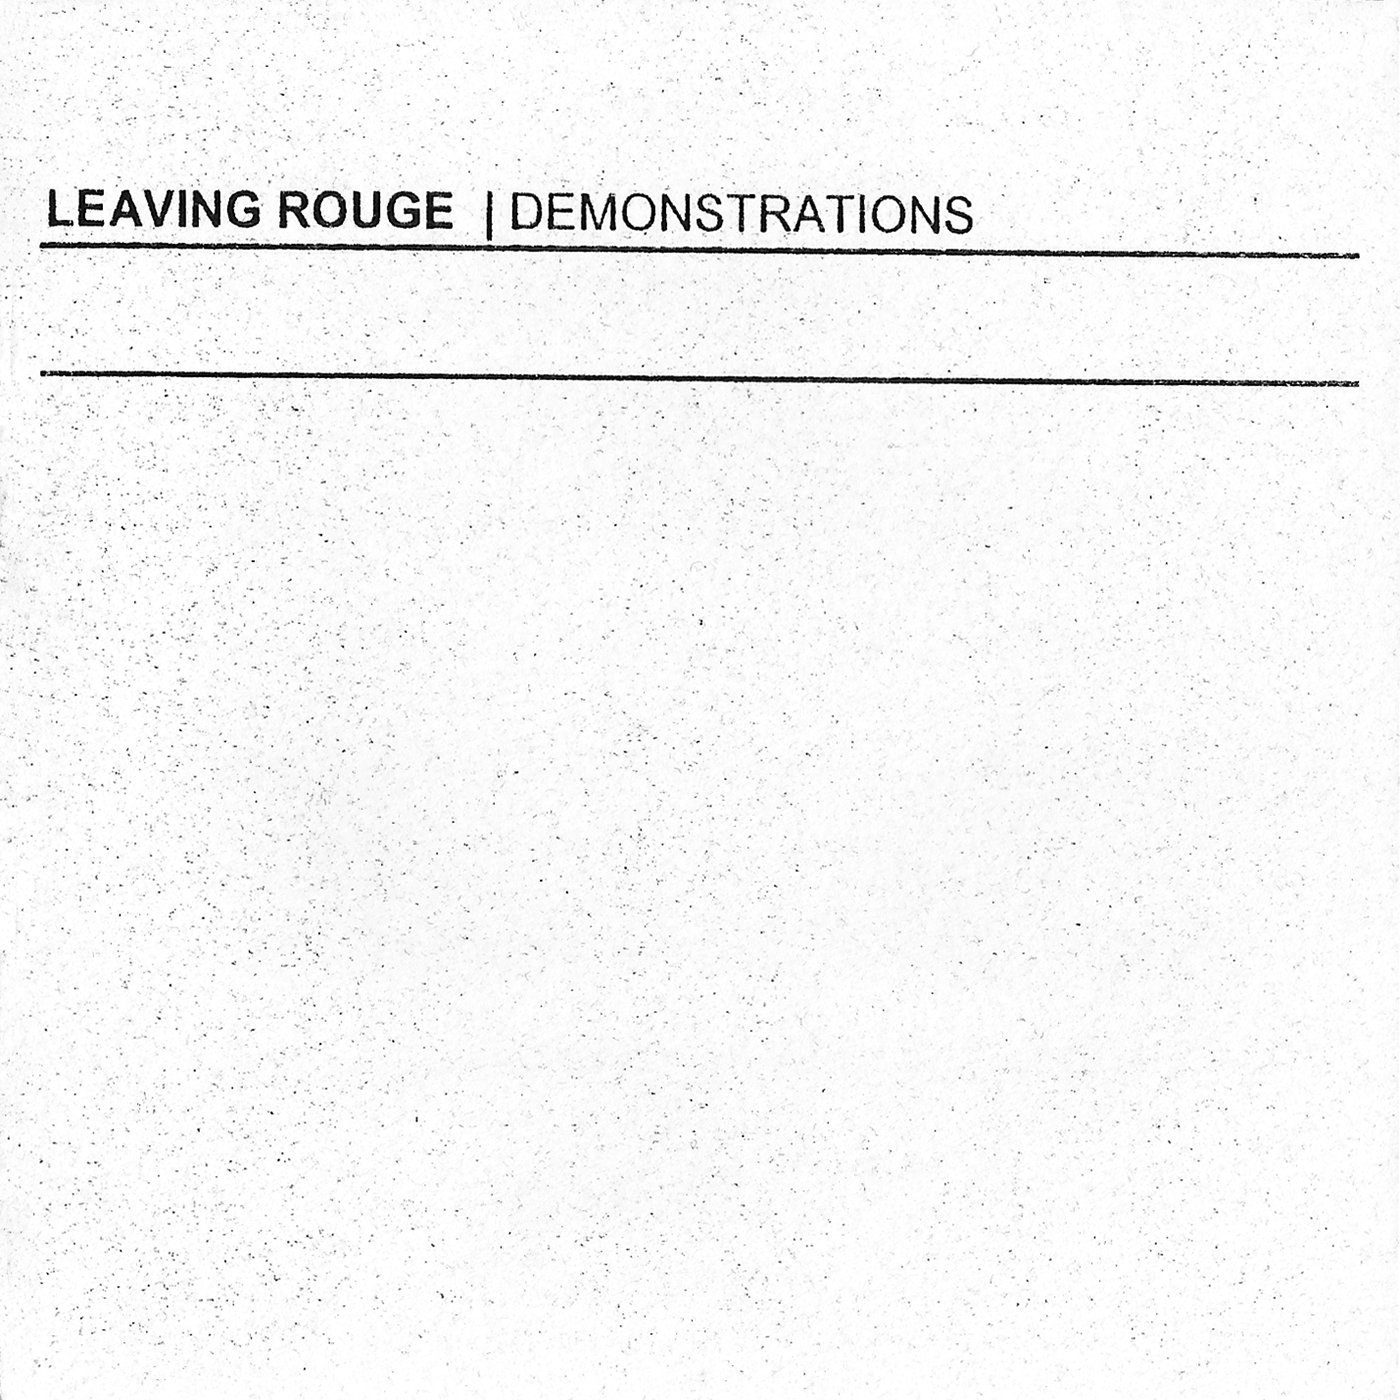 C.A.S.S. Works #10 - Leaving Rouge "Demonstrations", CD, 2002